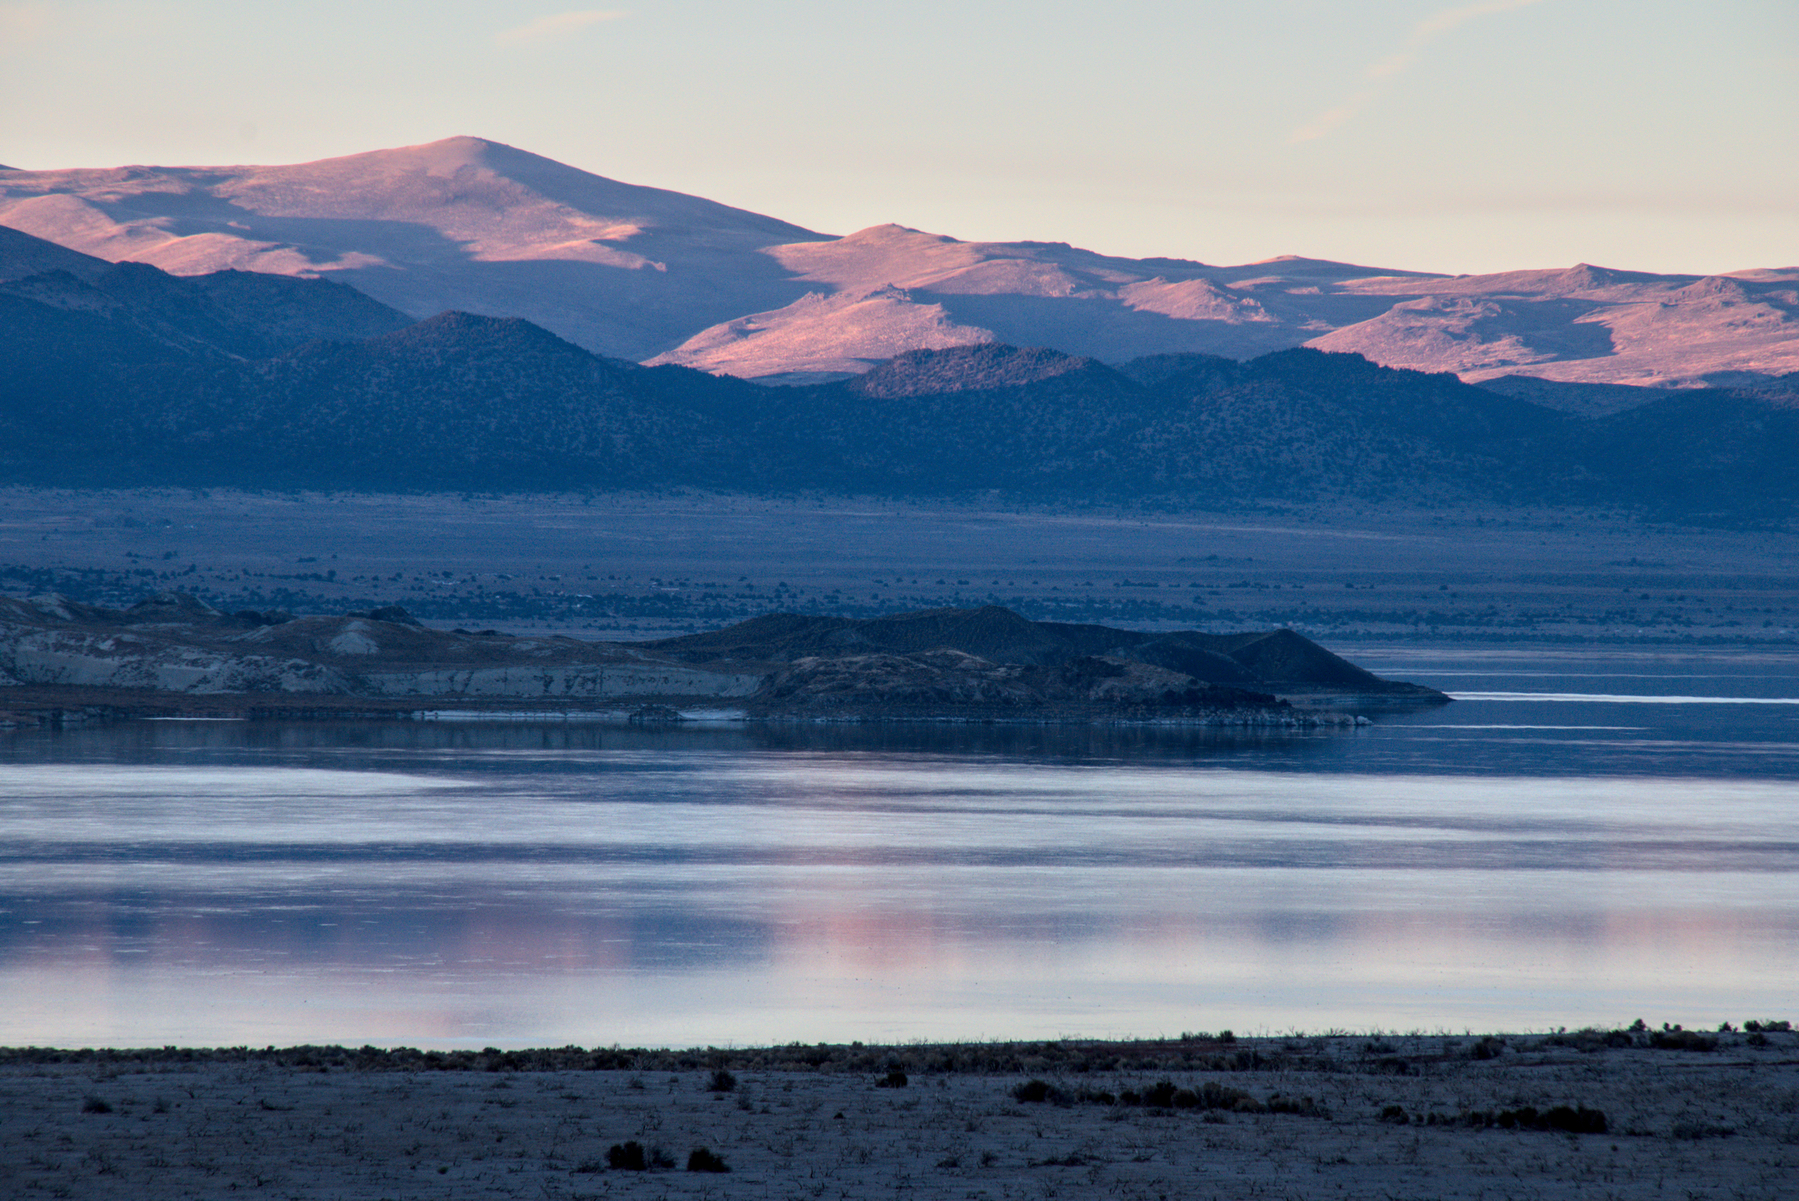 A large lake is calm as the sun sets, lit with pinks and blues from the surrounding hills.